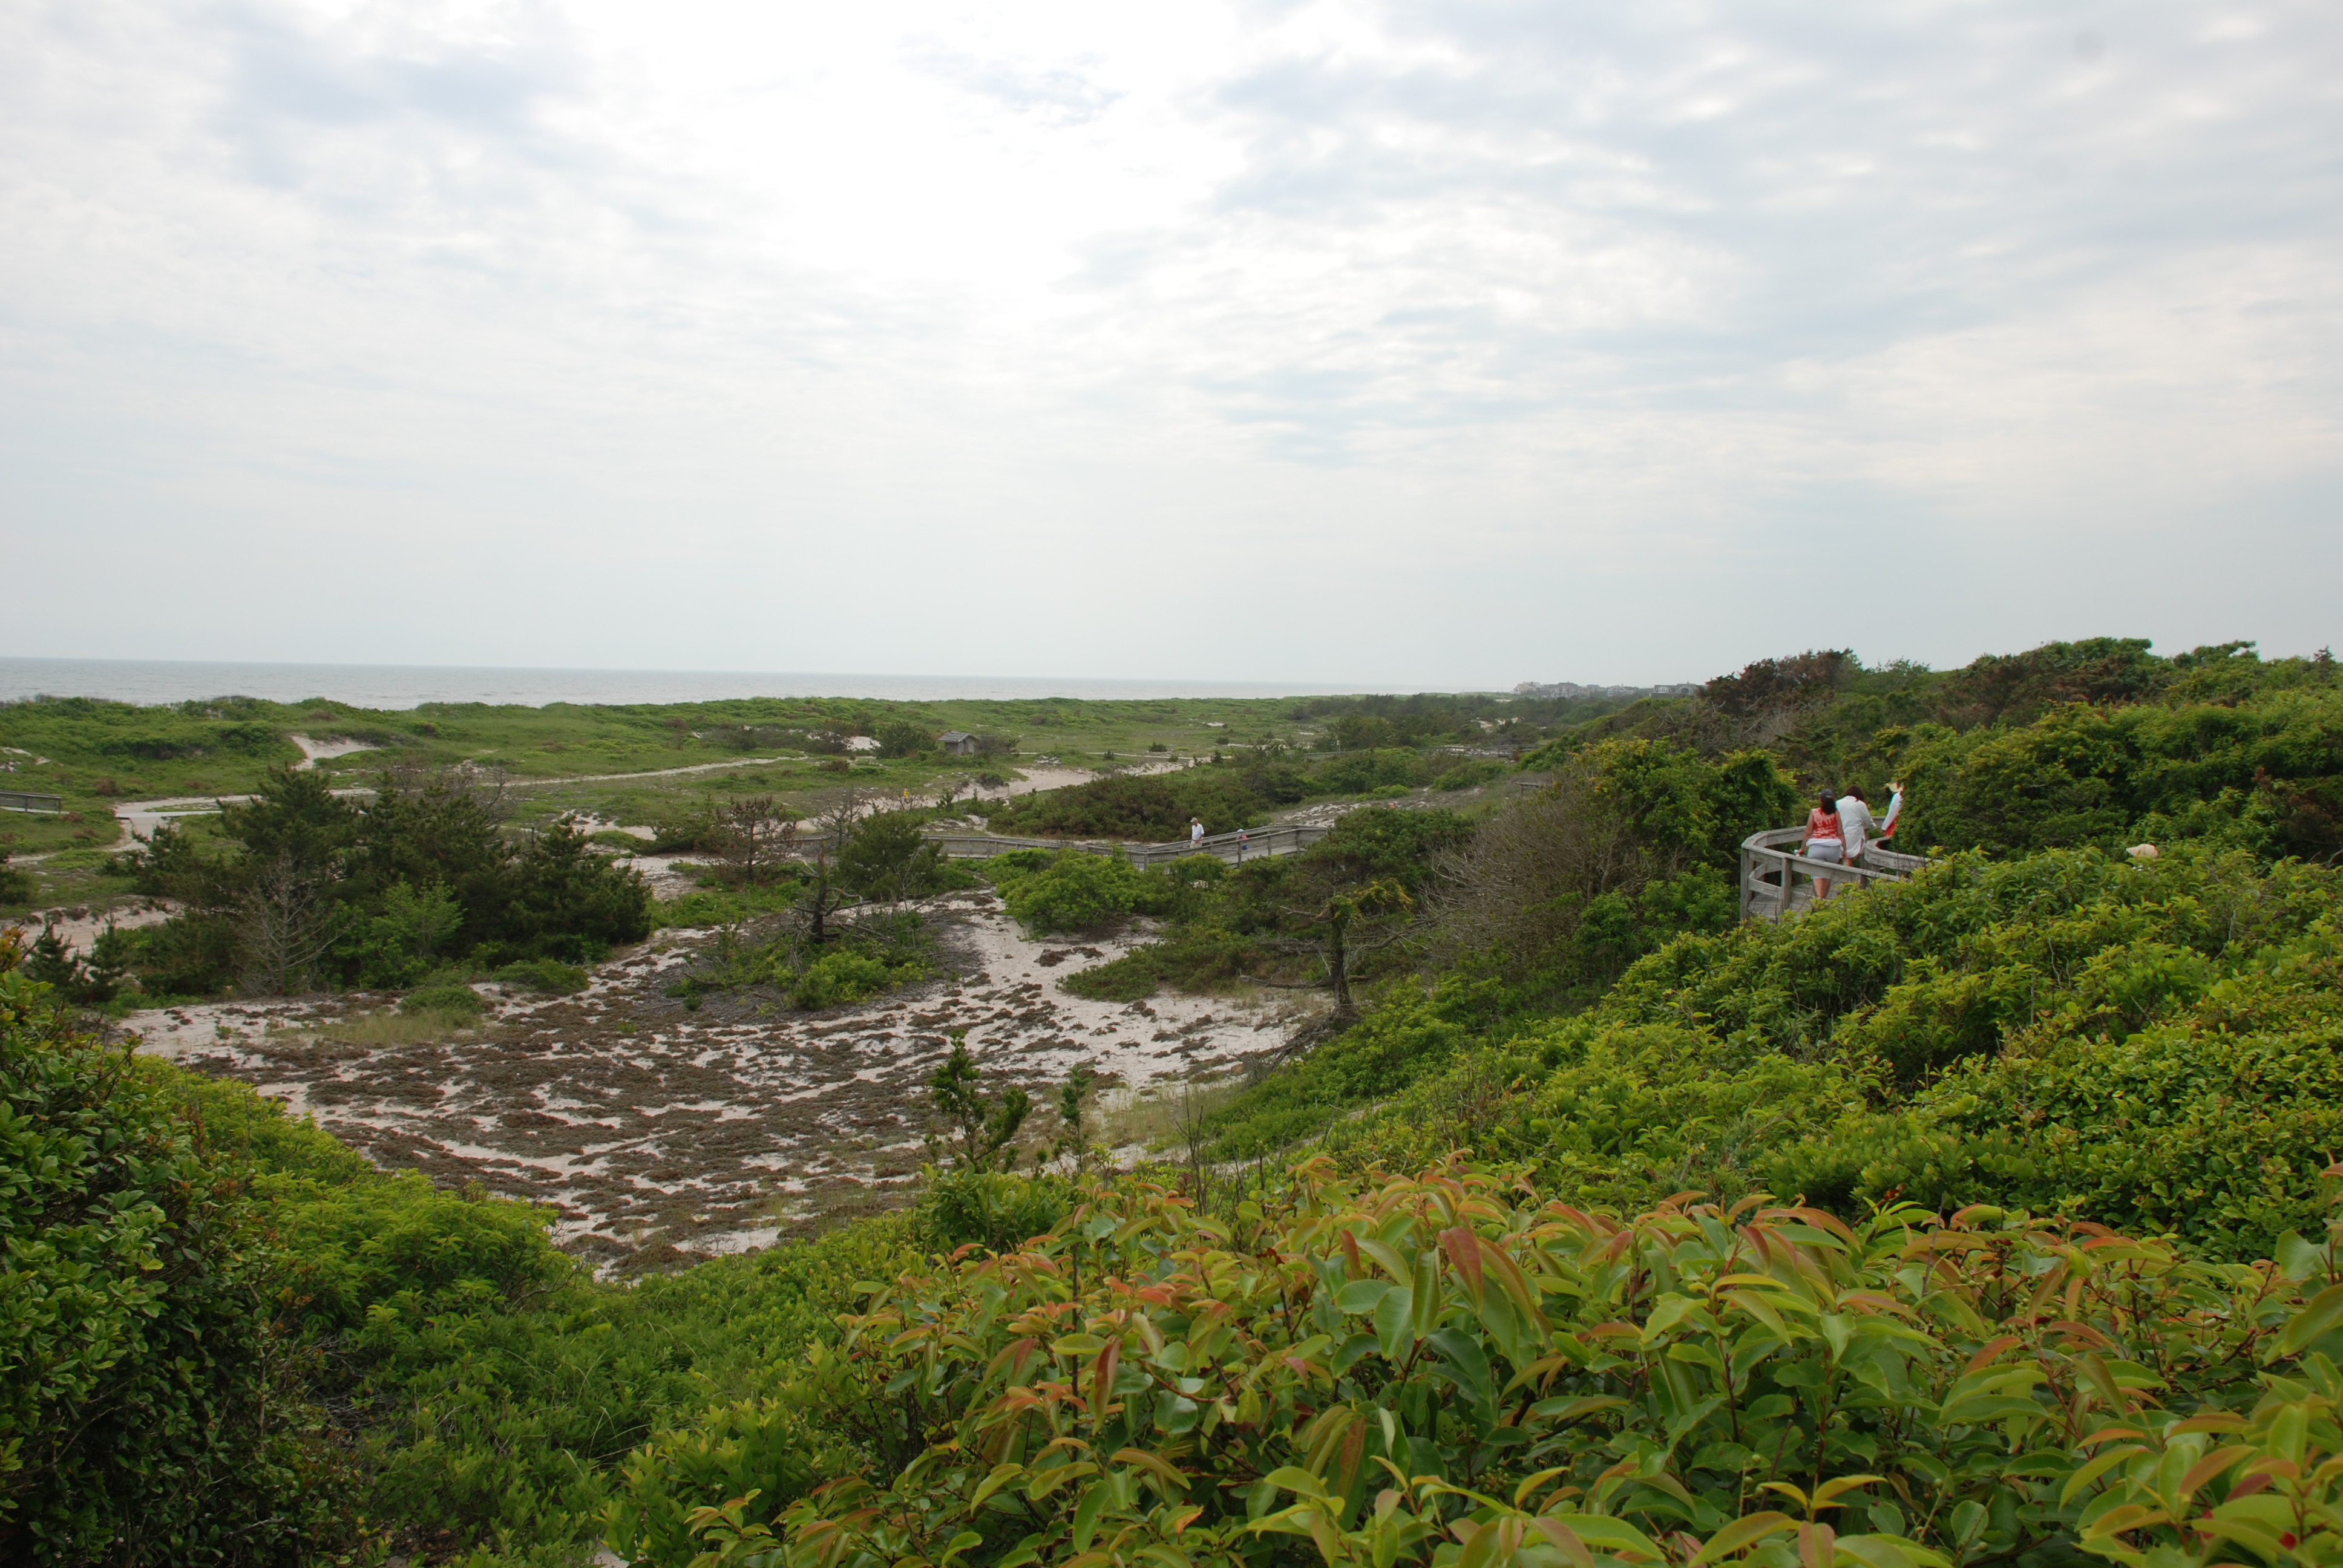 View of ocean and primary dune with boardwalk winding up to the Sunken Forest overlook.